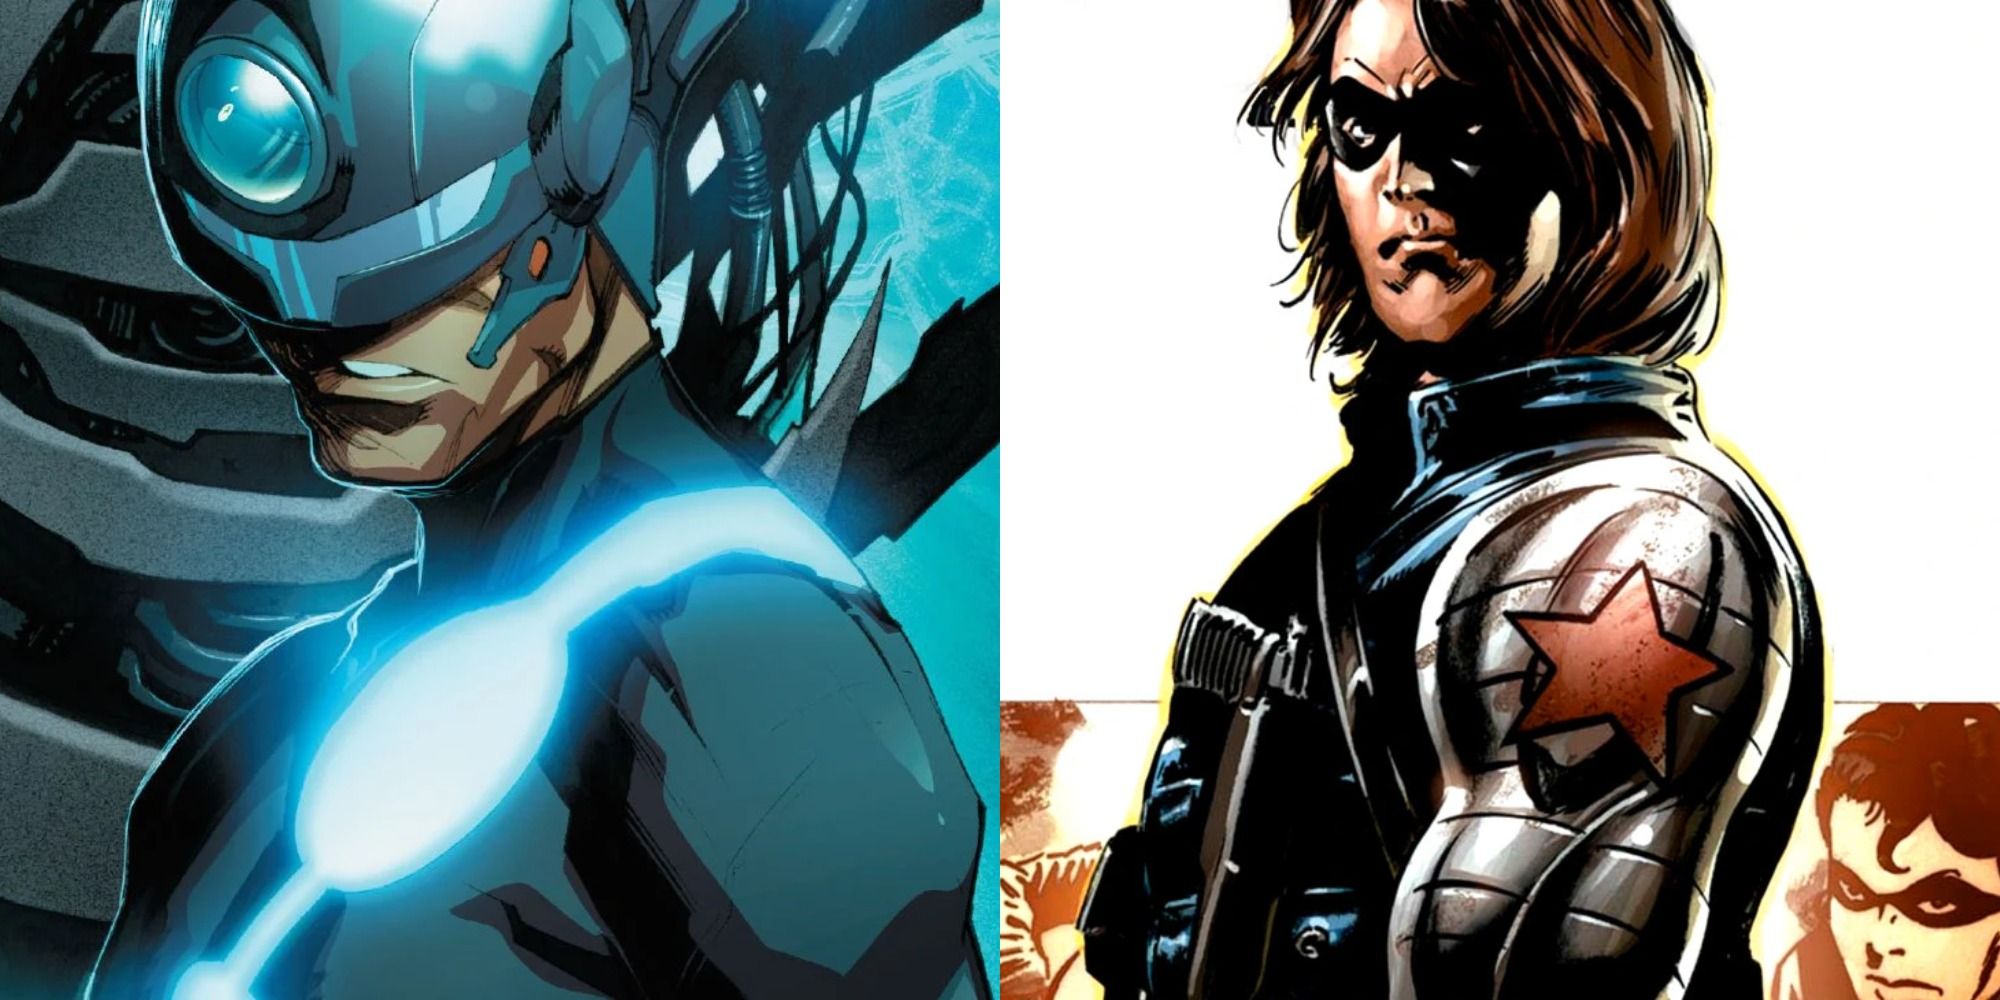 Split image showing The Maker and the Winter Soldier in Marvel Comics